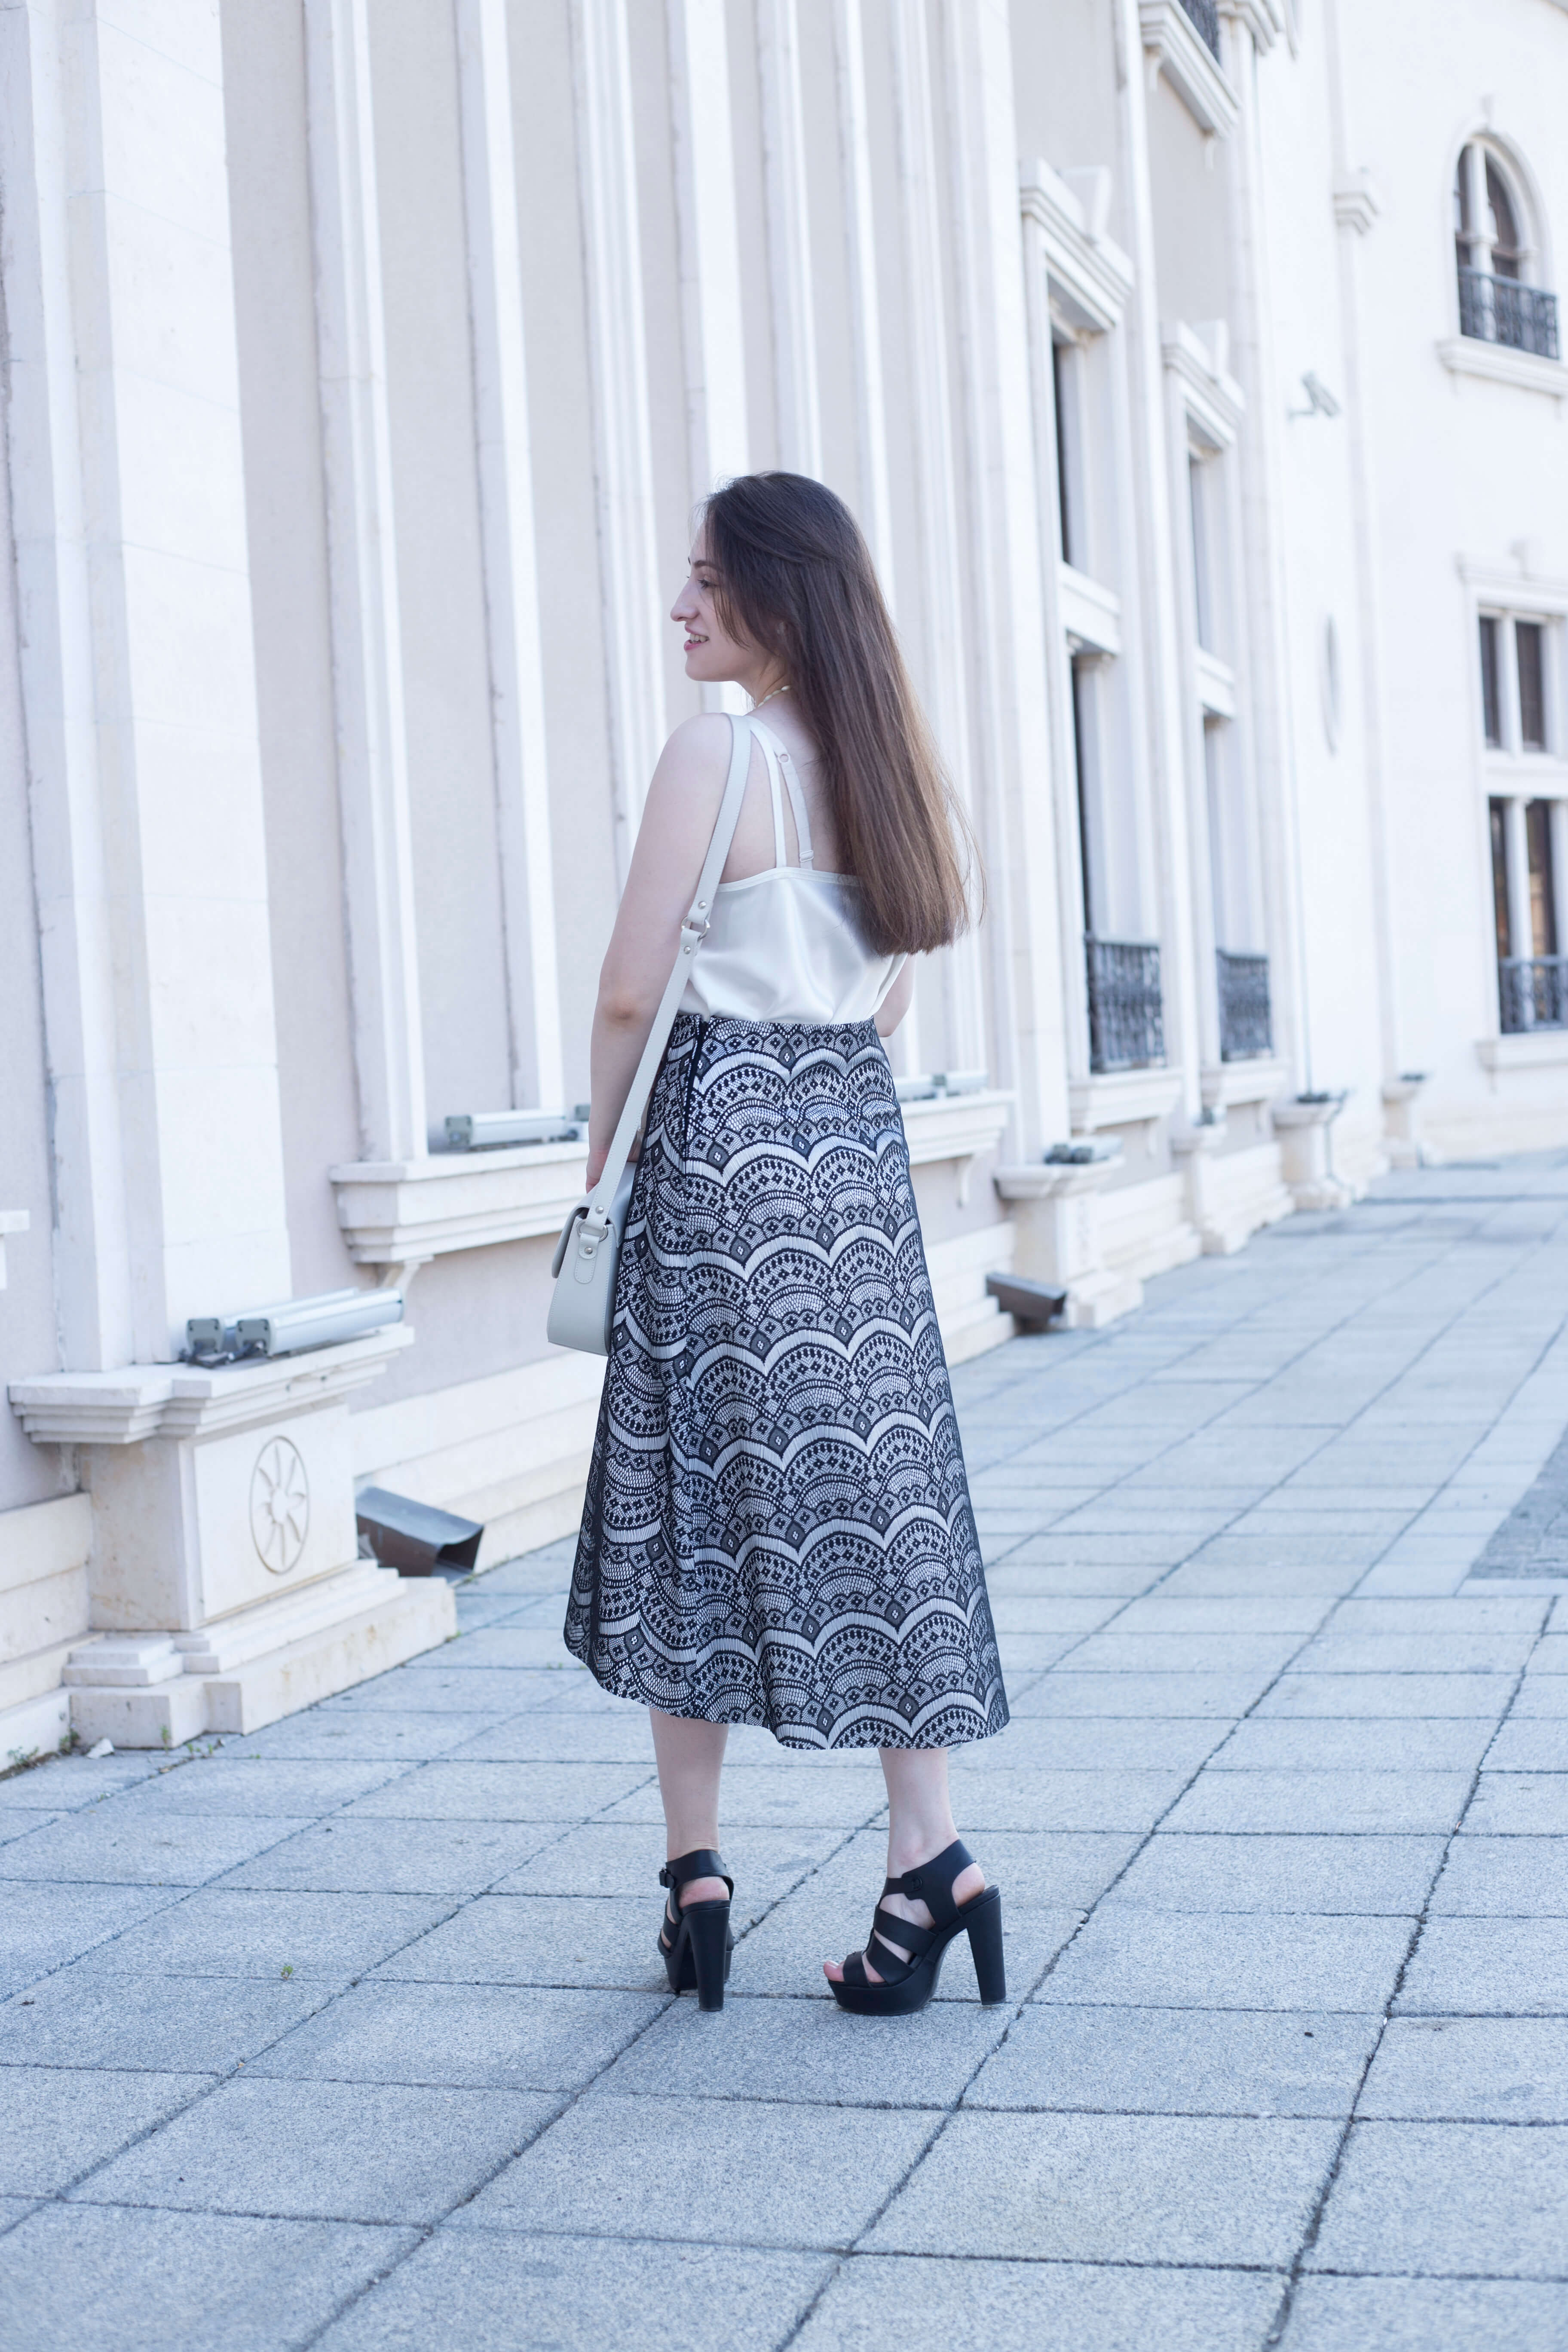 I designed a simple but very versatile asymmetrical lace skirt!